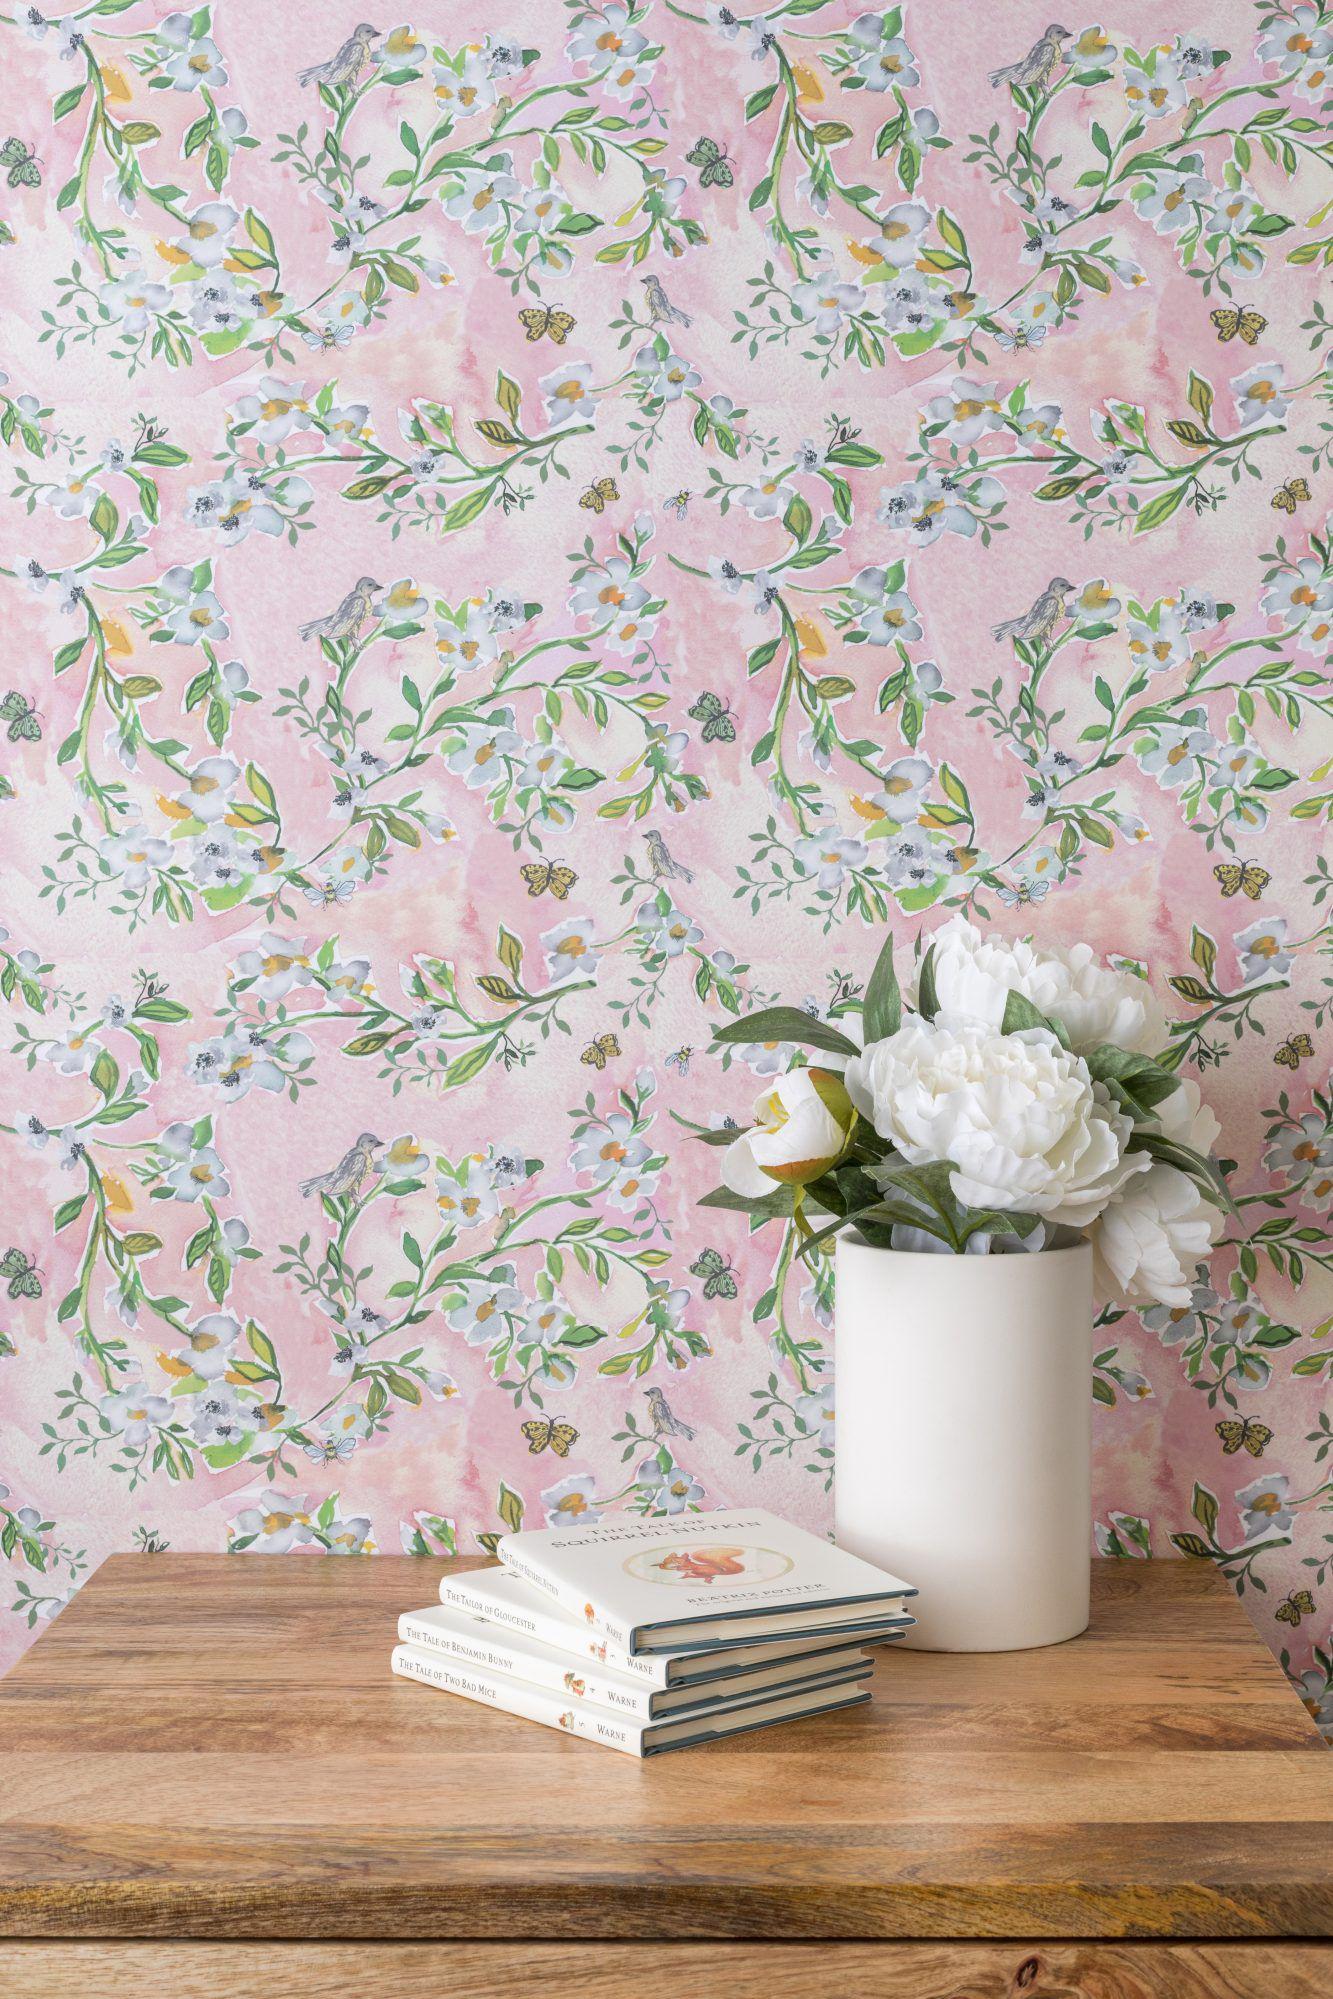 Sunny Removable Wallpaper Patterns For A Fast Summer Room Refresh